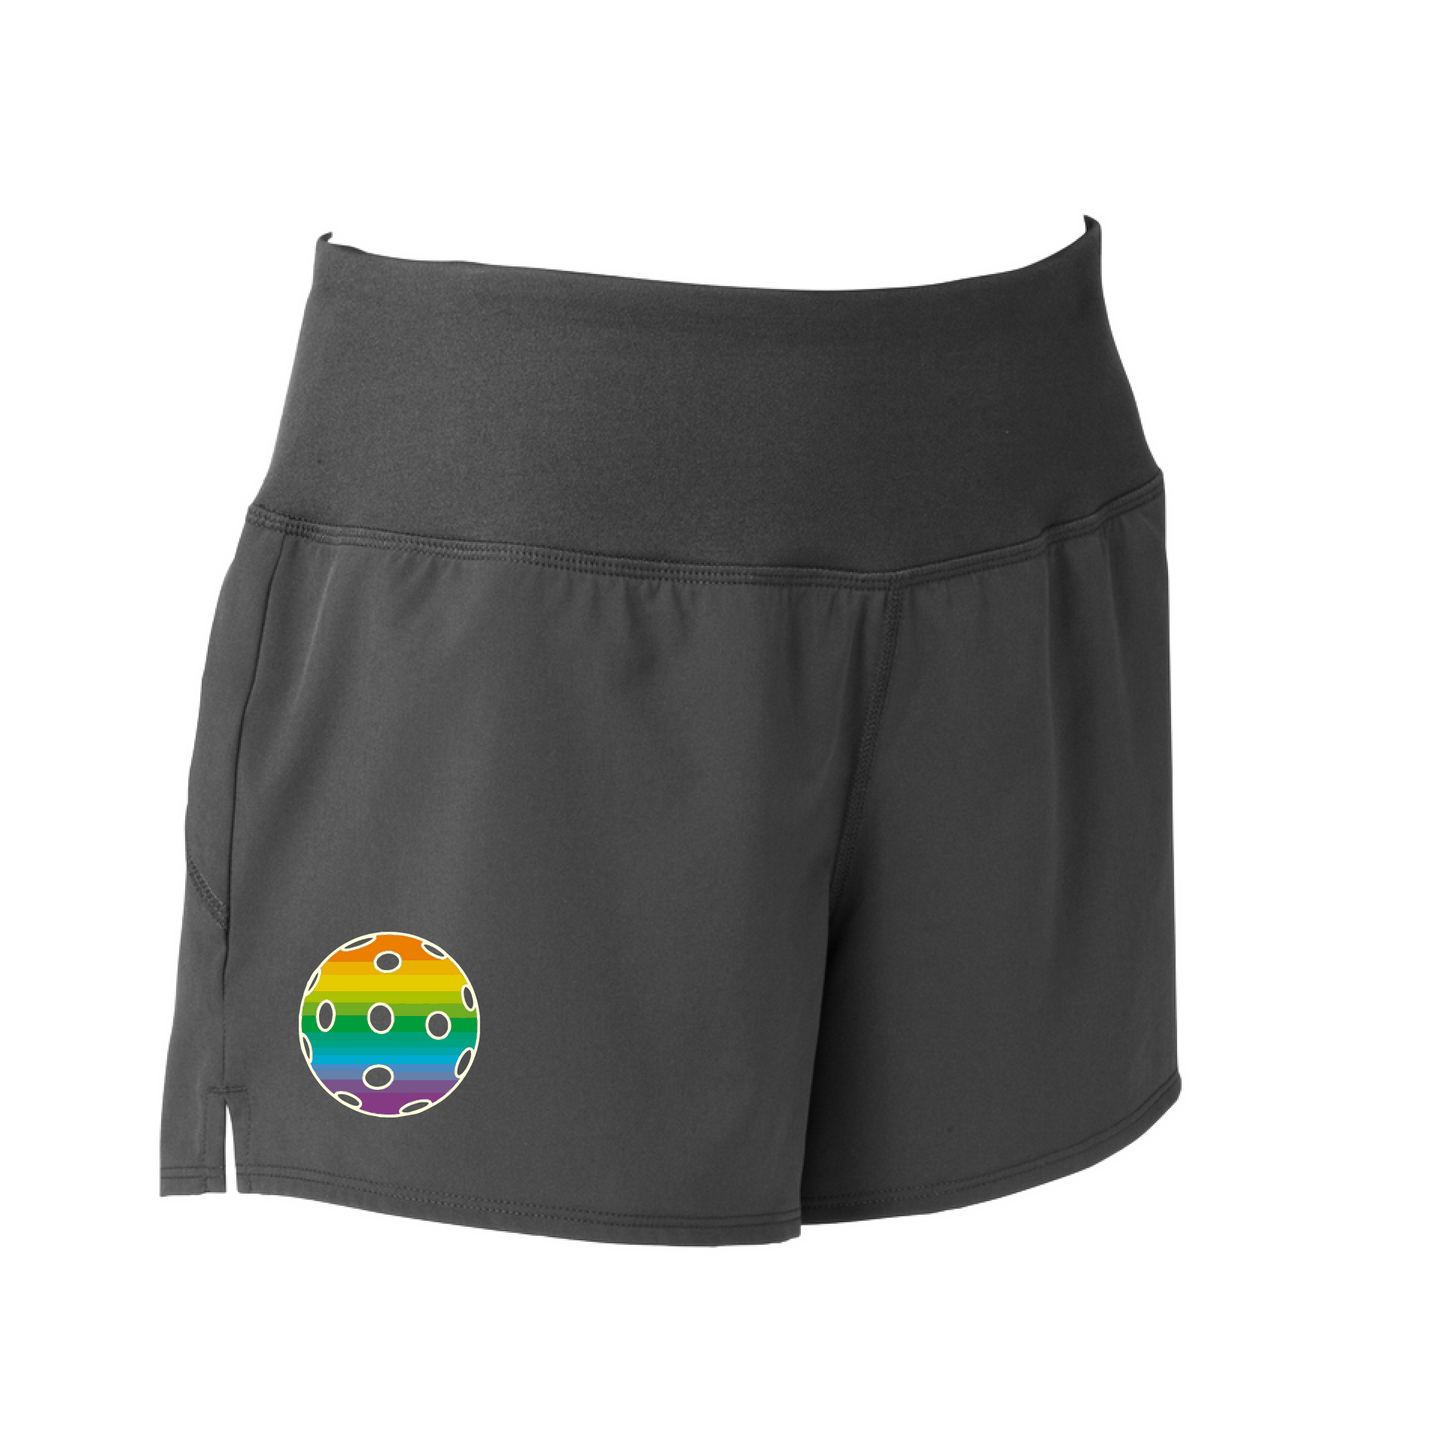 Pickleball Short Design: Customizable Pickleball Color: Choose from: Purple, Rainbow, Yellow and White.  Sport Tek women’s repeat shorts come with built-in cell phone pocket on the exterior of the waistband. You can also feel secure knowing that no matter how strenuous the exercise, the shorts will remain in place (it won’t ride up!). These shorts are extremely versatile and trendy. Transition from the Pickleball court to running errands smoothly.